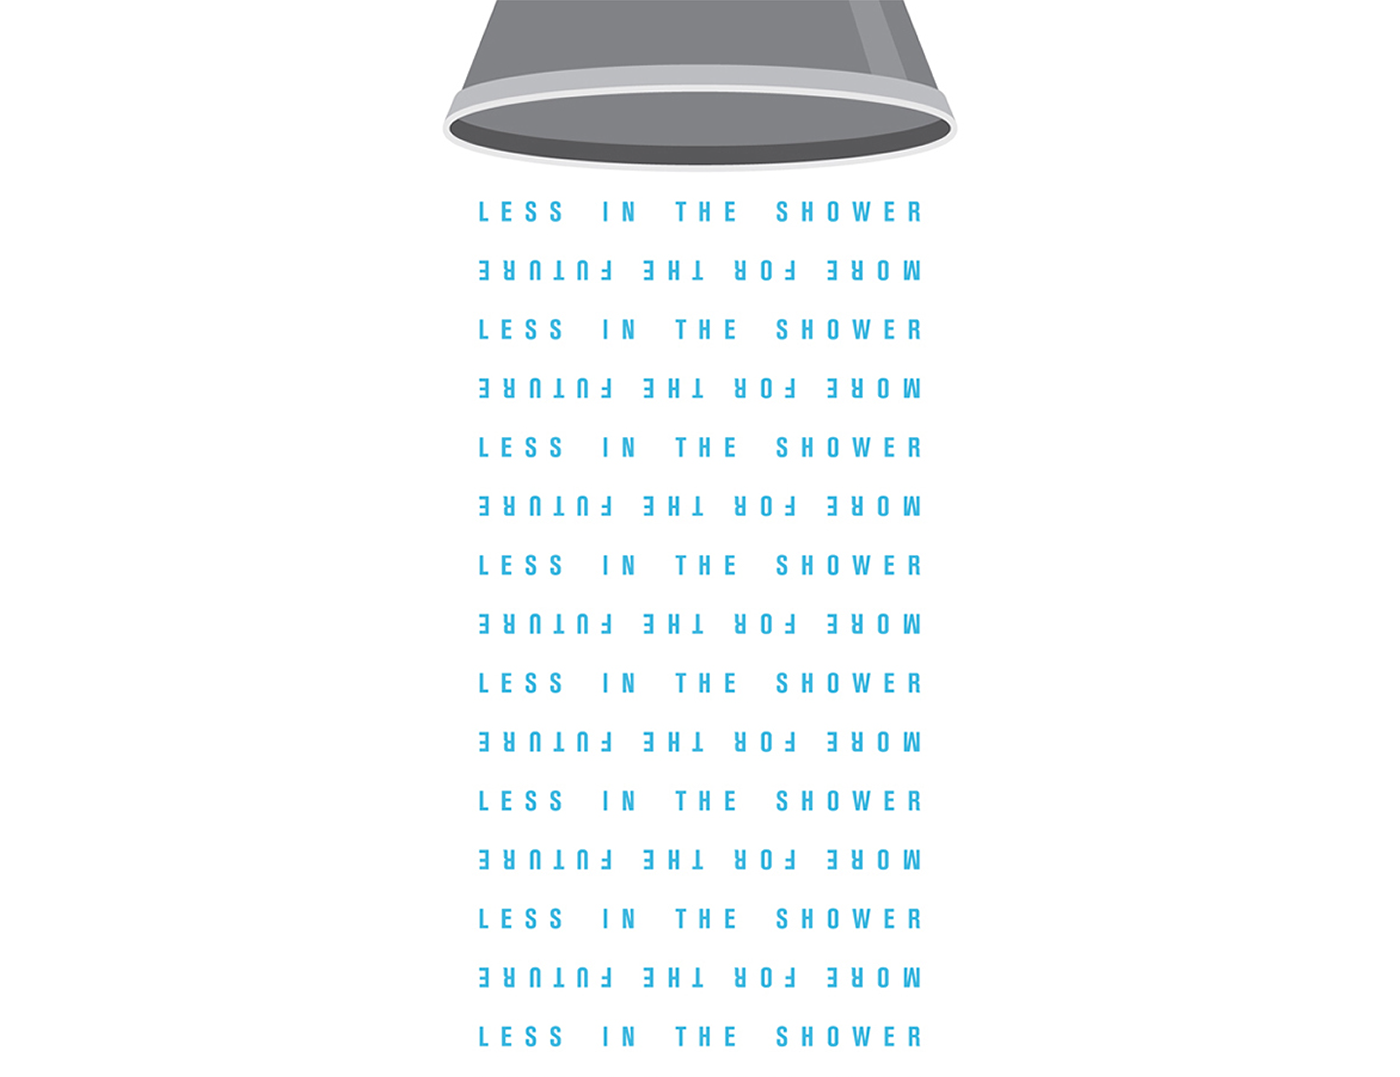 WWF water conservation MediaCorp YoungLions submission showerhead bucket minimal poster Competition